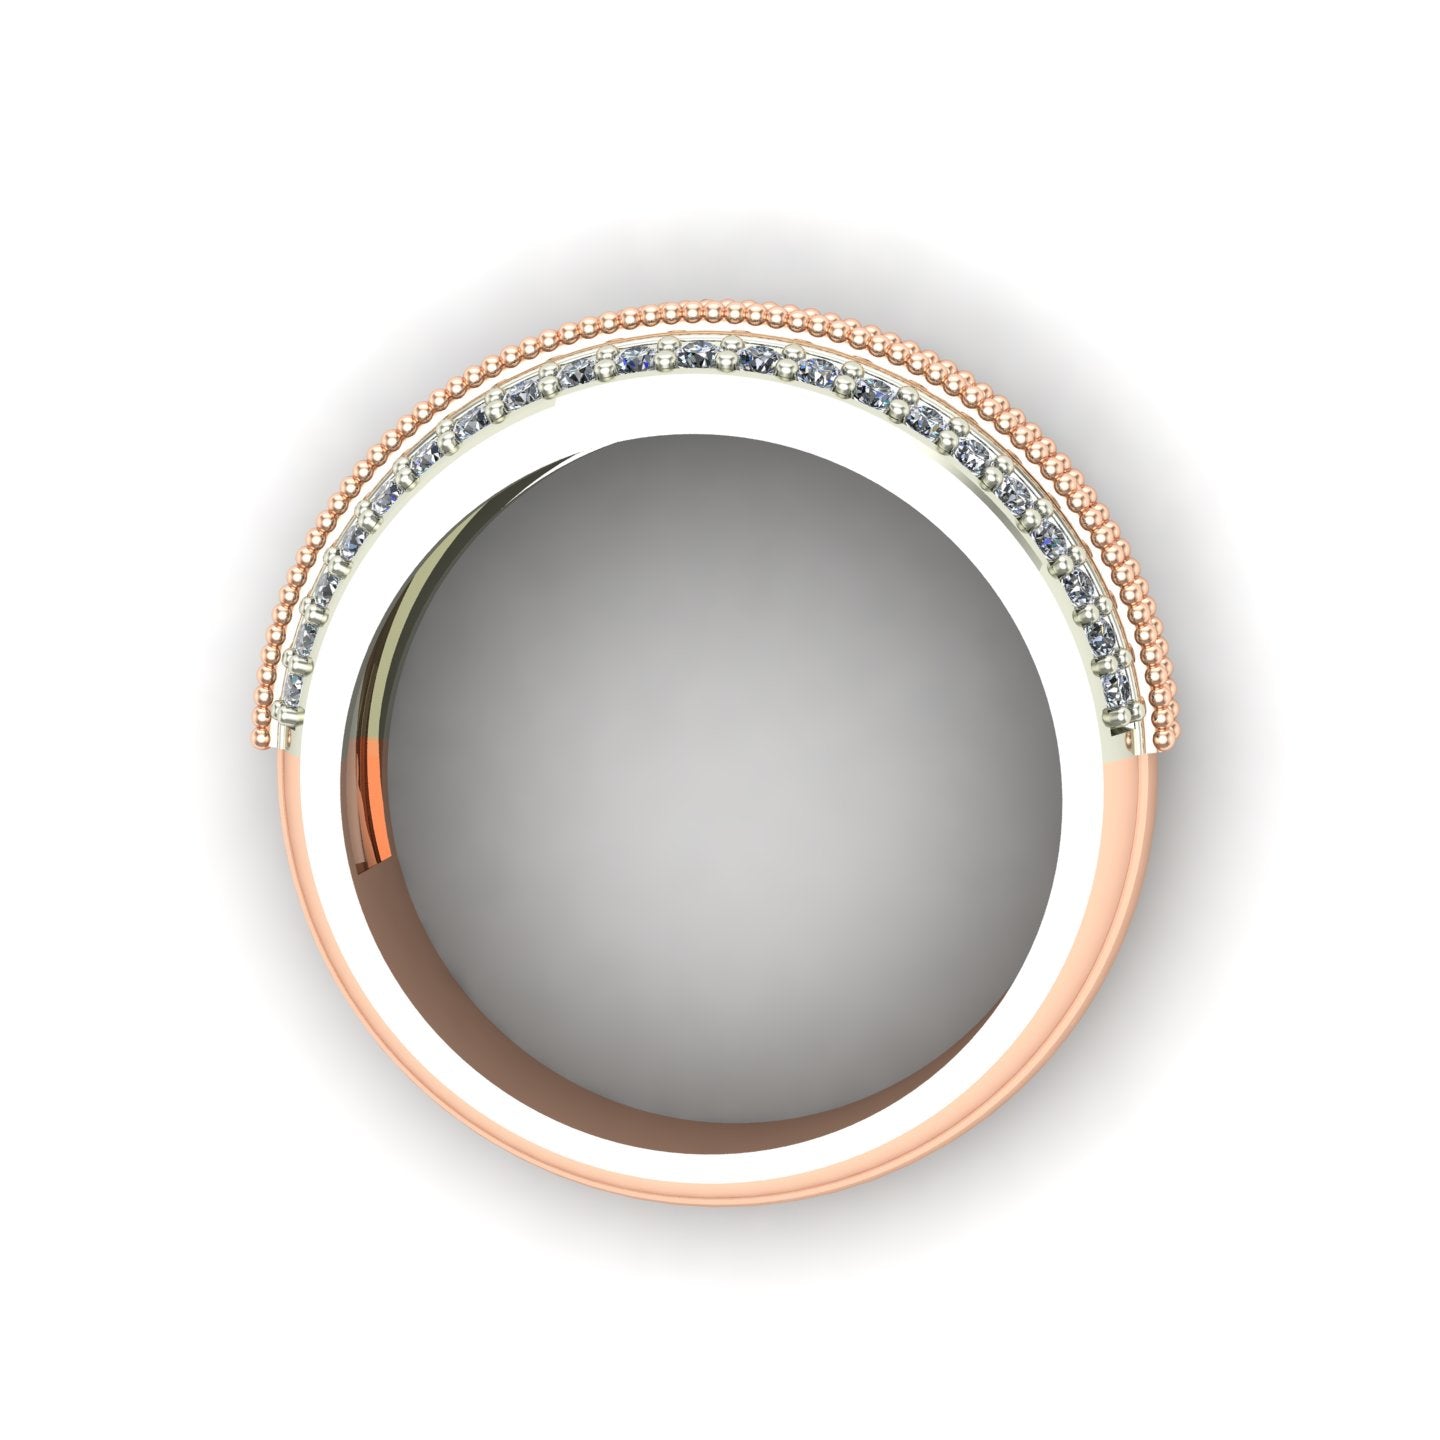 Cognac and white diamond band in 14k rose and white gold - Charles Babb Designs - through finger view